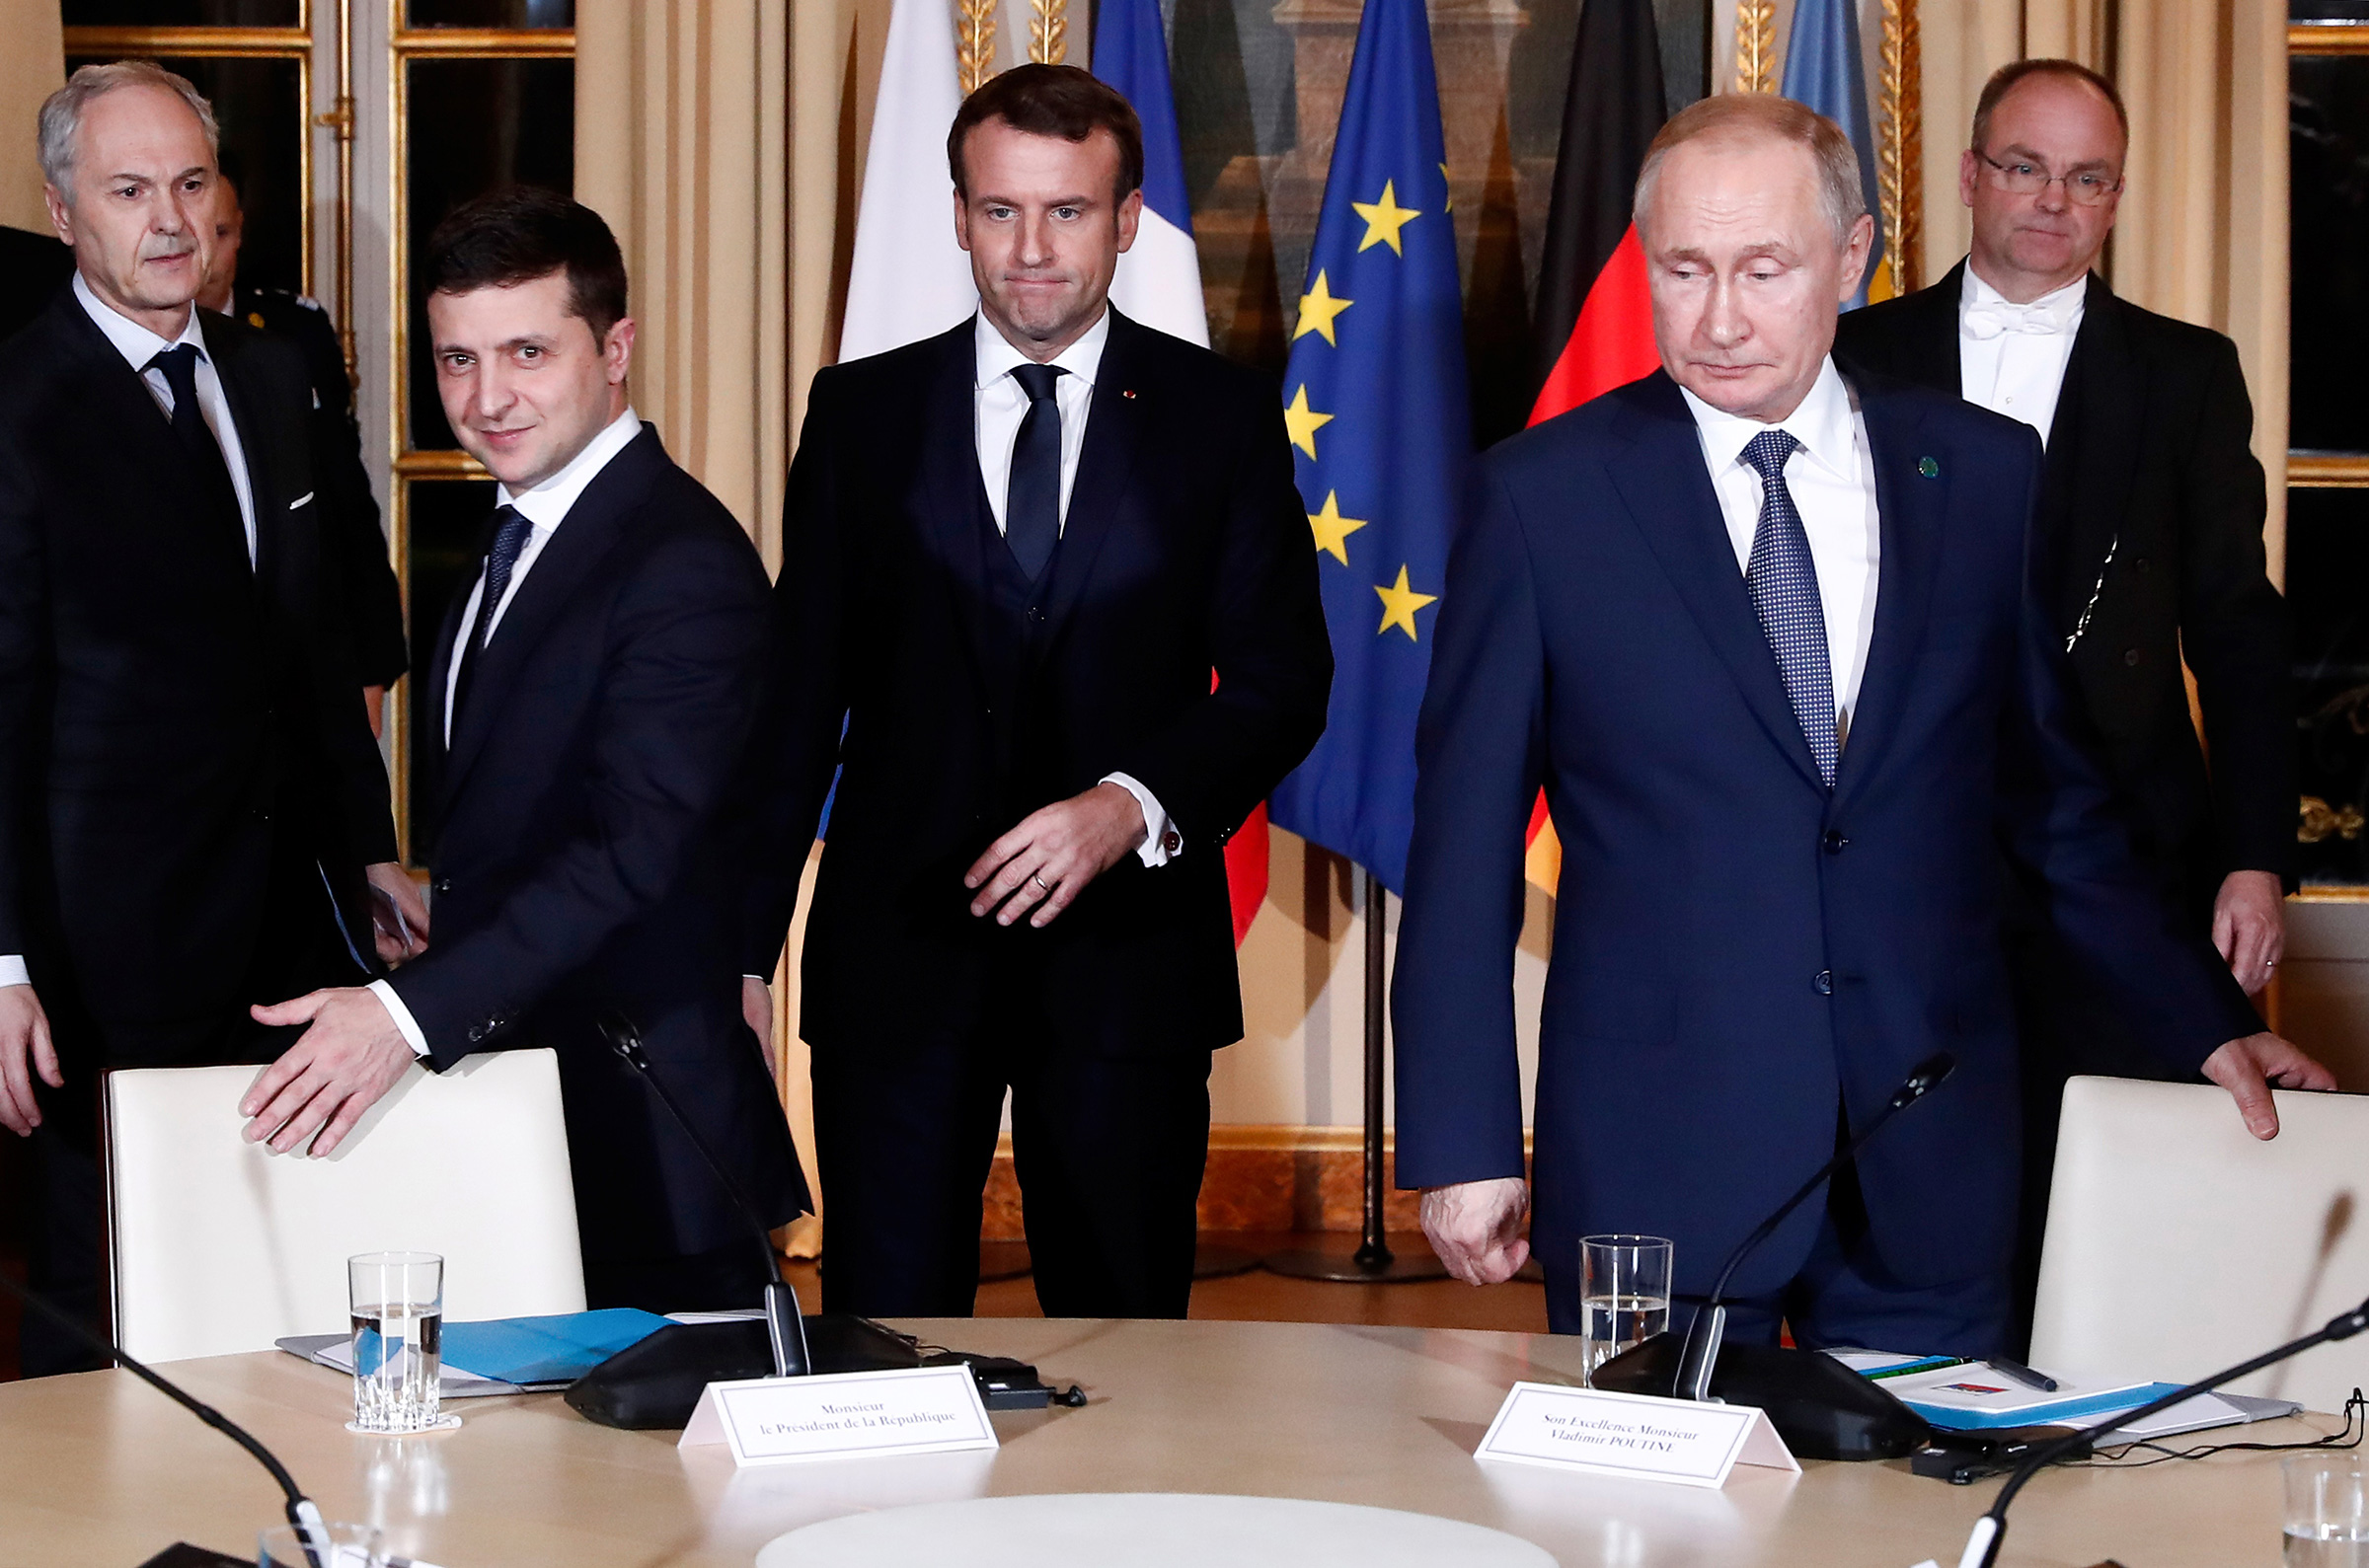 Zelensky meets with Putin and French President Emmanuel Macron in Paris in December 2019 (Ian Langsdon—AFP/Getty Images)